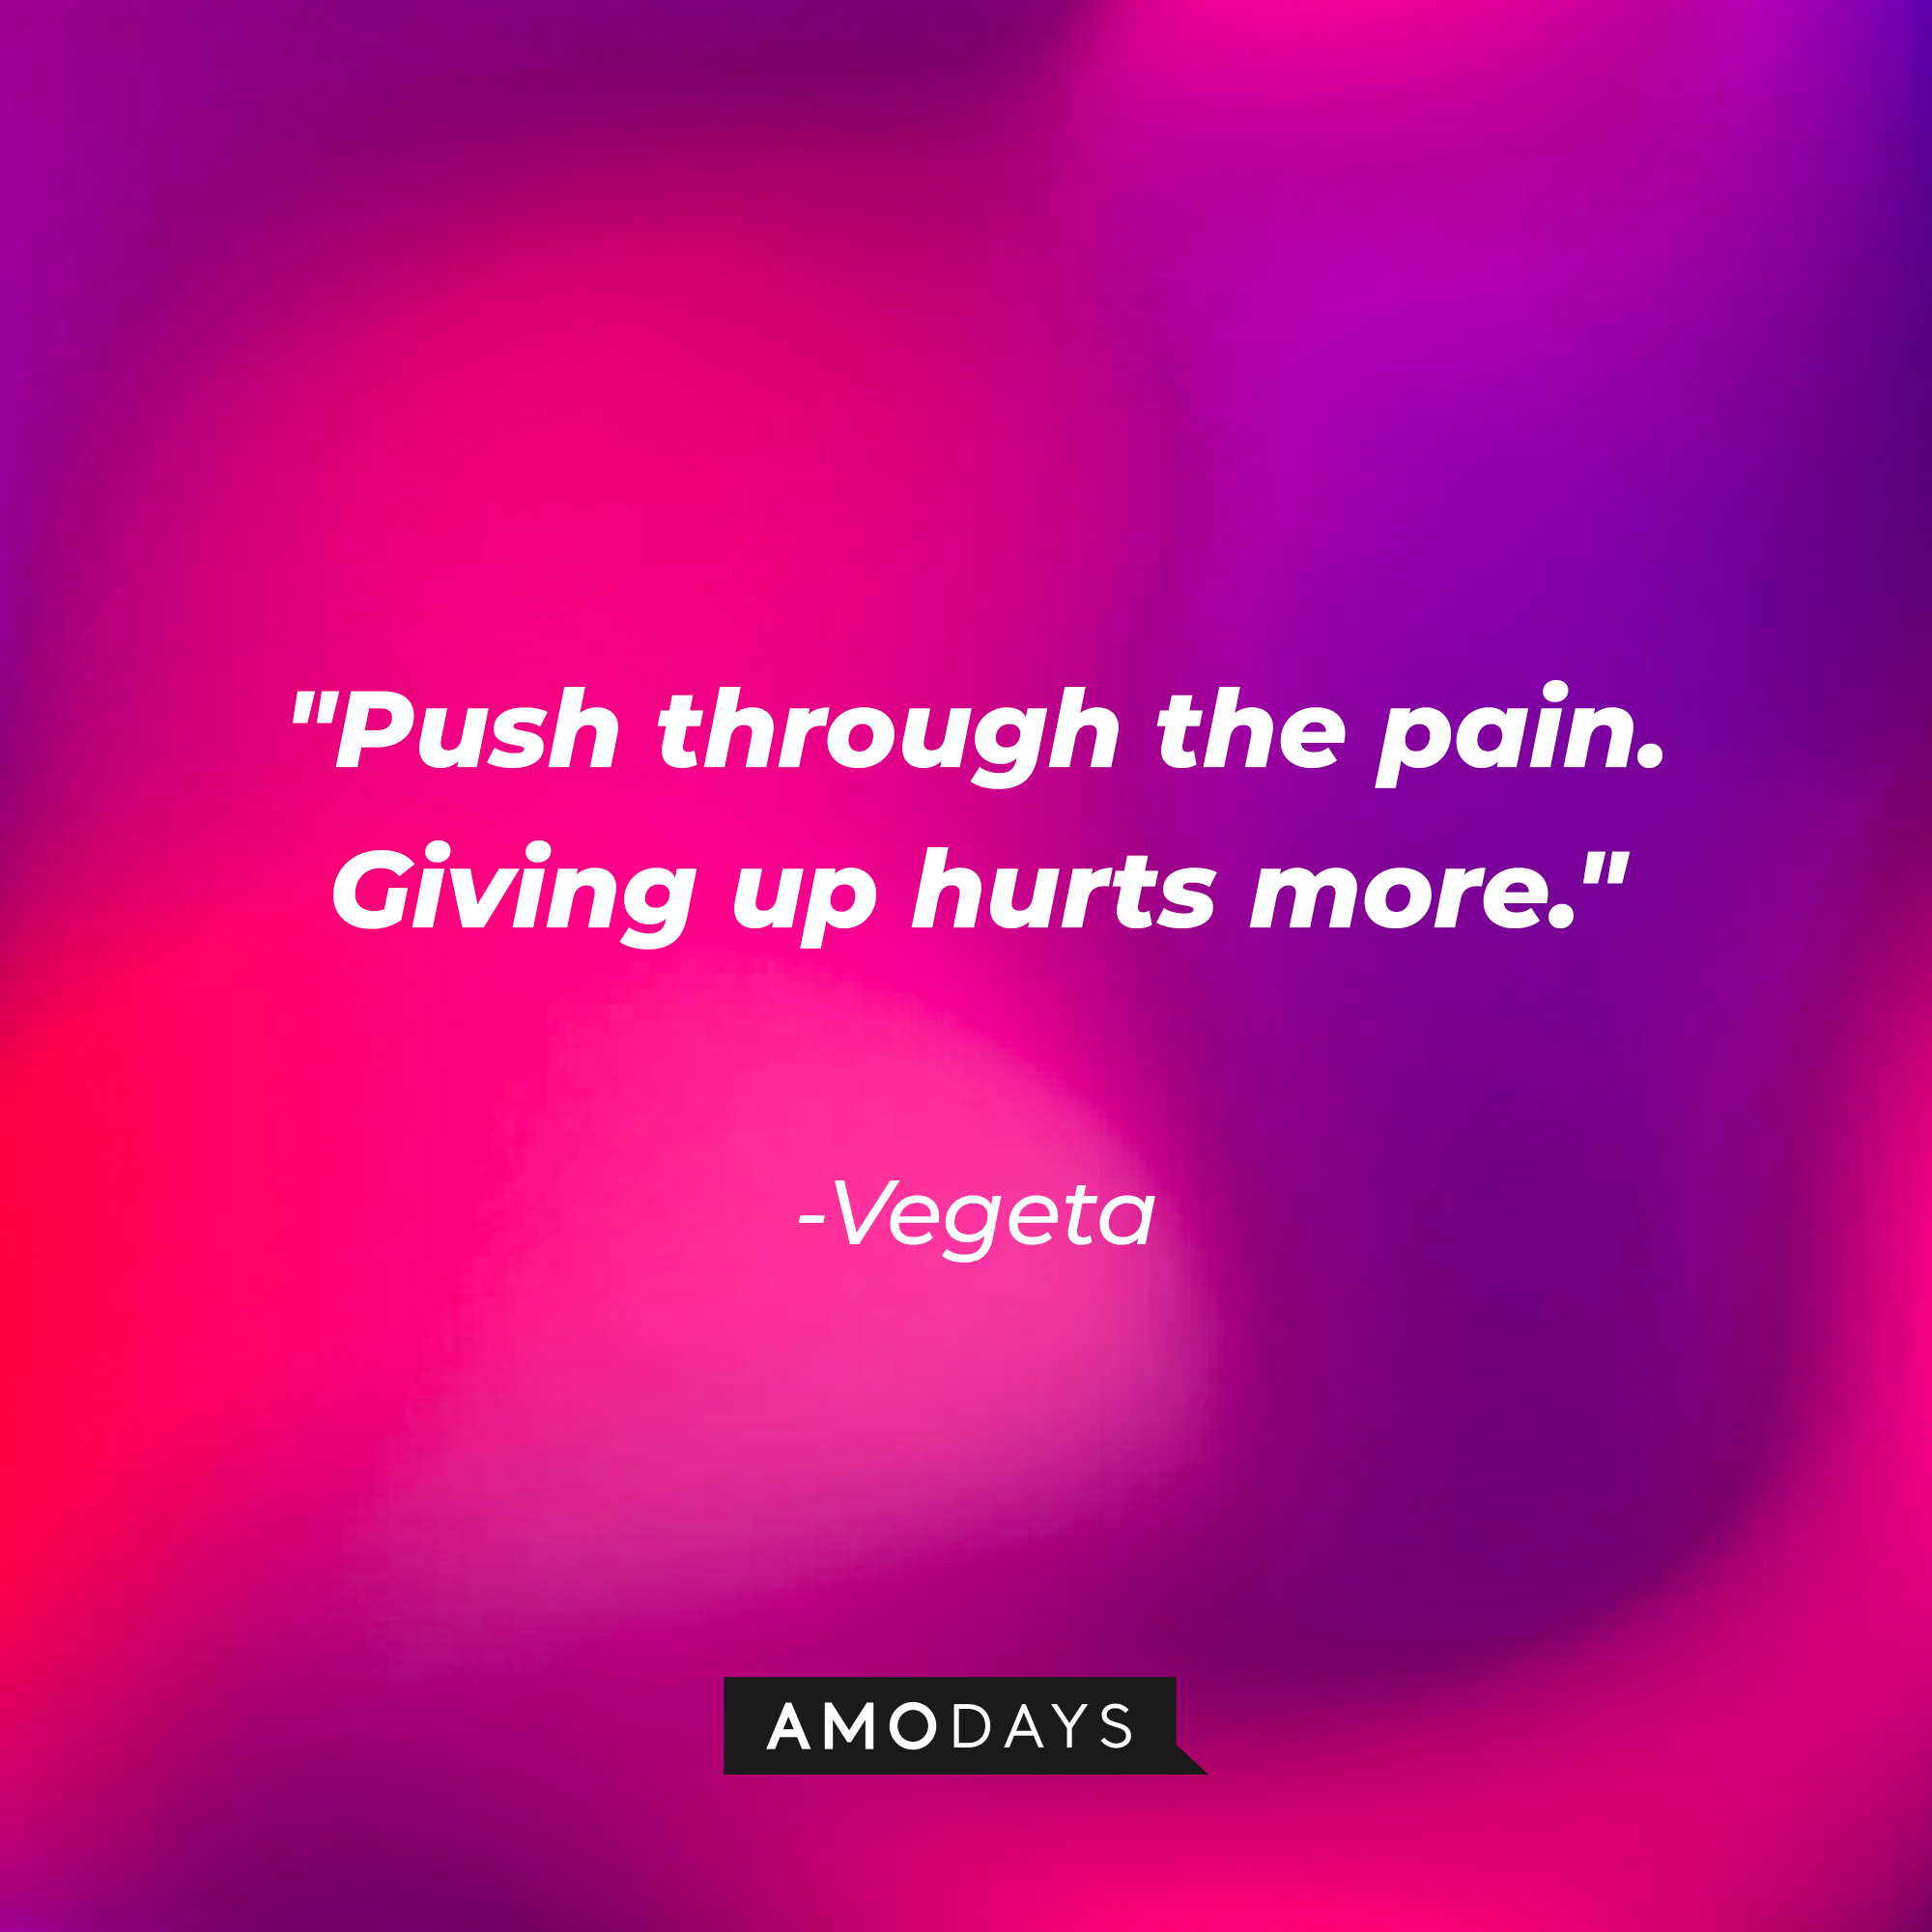 Vegeta's quote: "Push through the pain. Giving up hurts more." | Source: Amodays